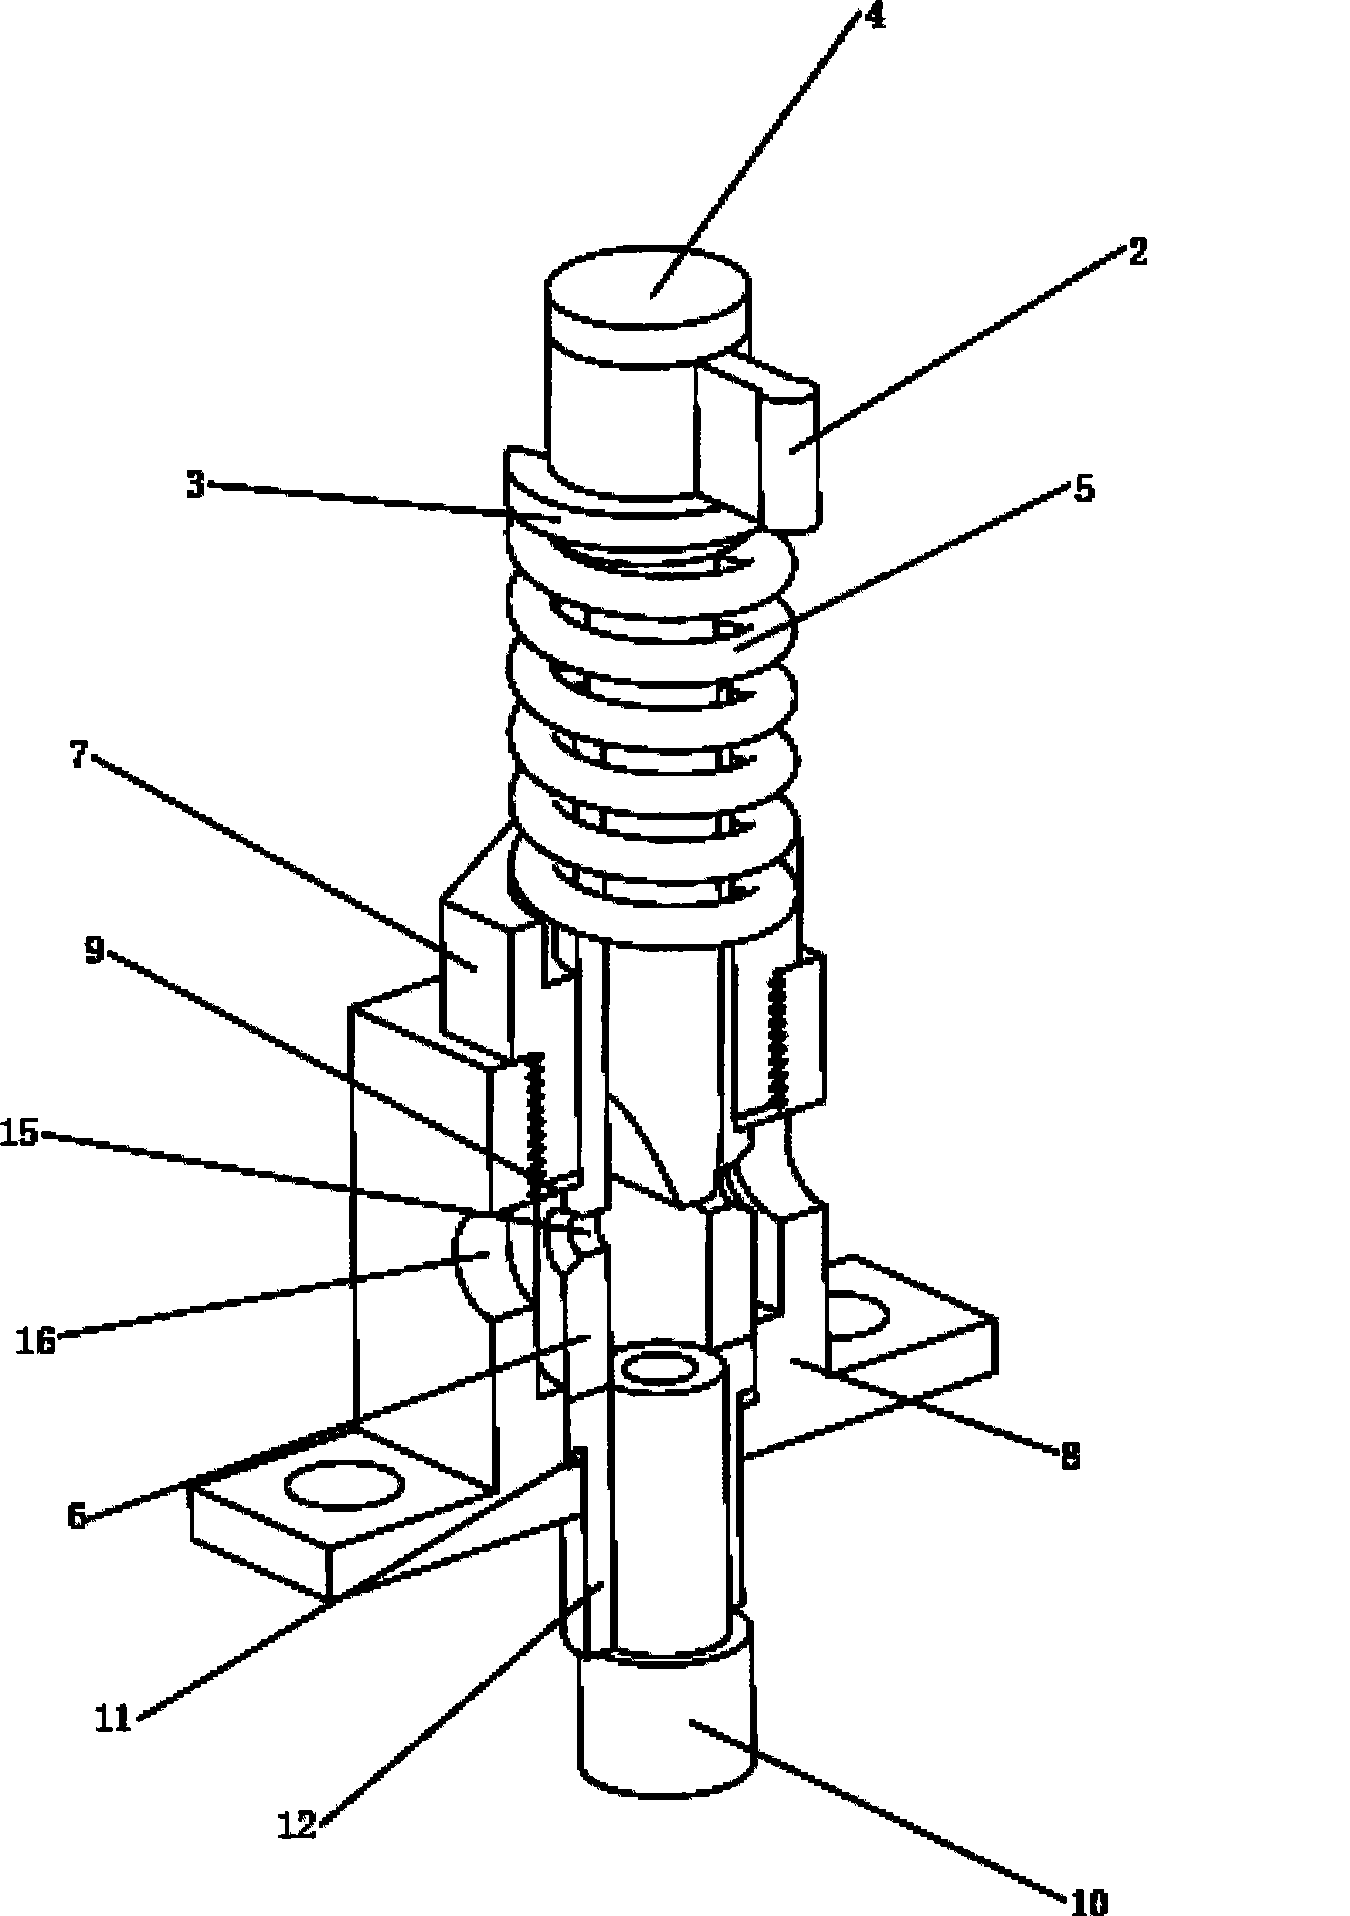 Continuously adjustable mechanical hydraulic valve lift device